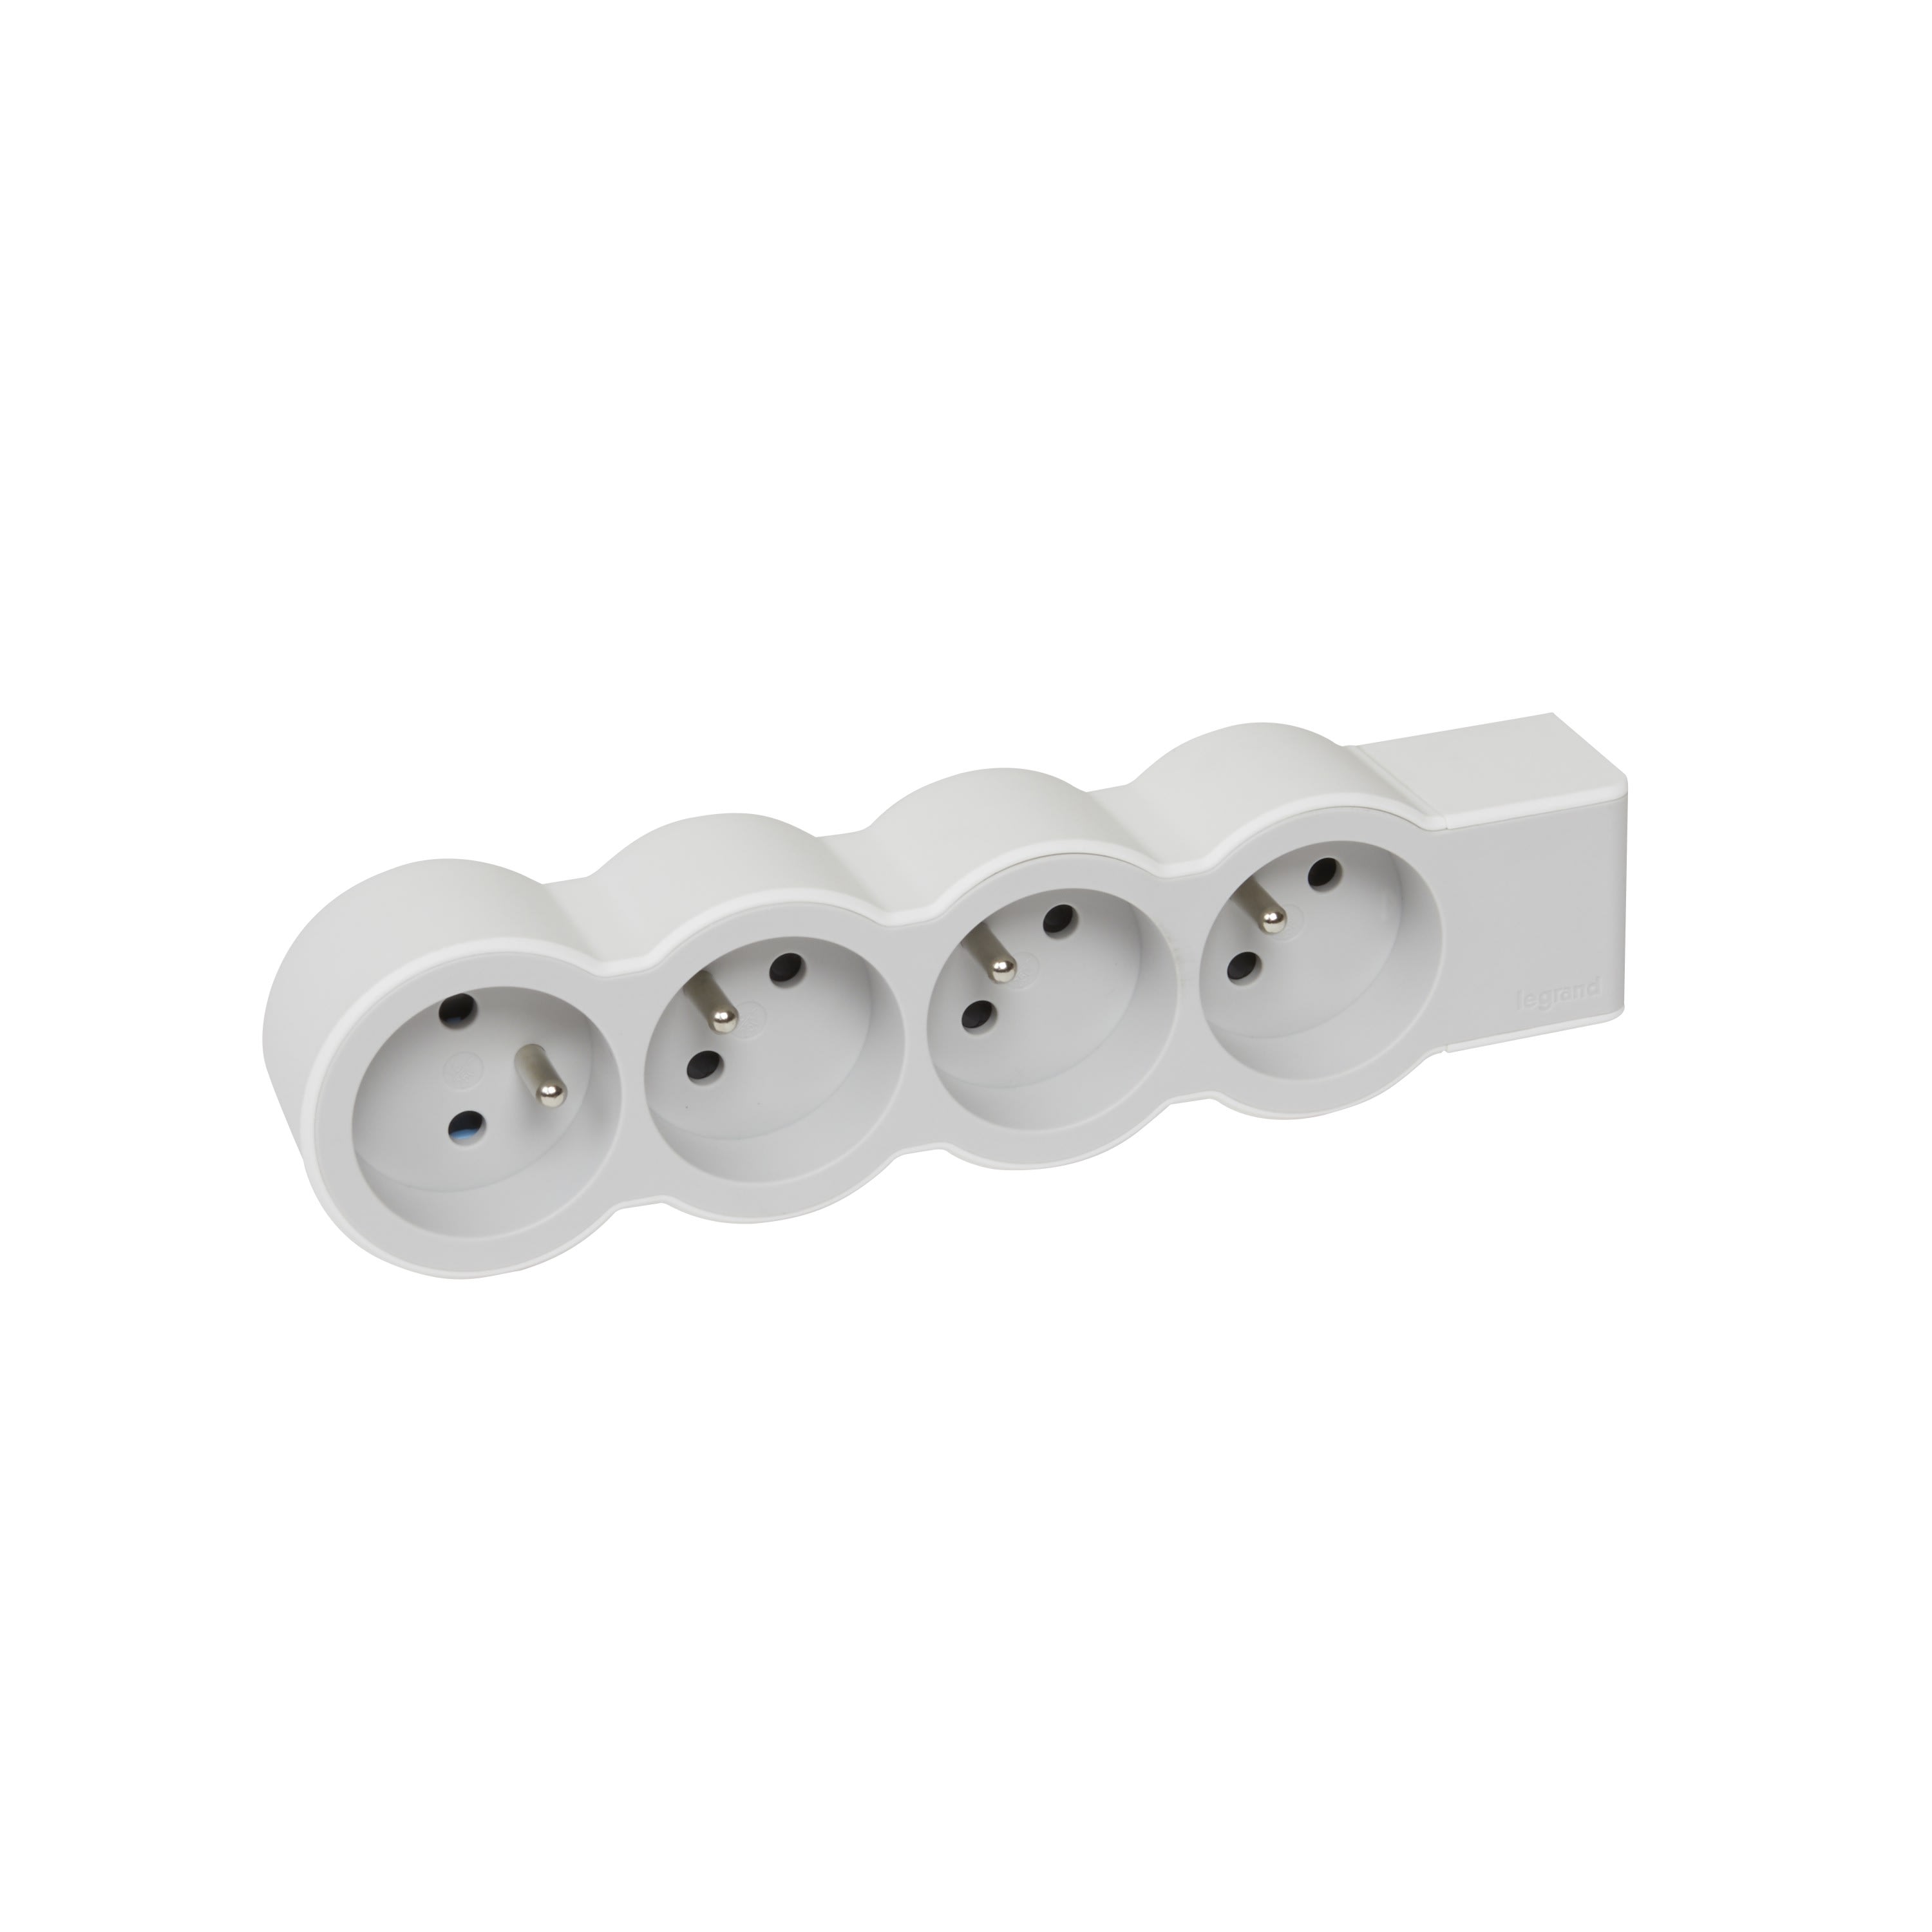 Rallonge extra-plate 4x2P+T a cabler - blanc-gris clair Legrand